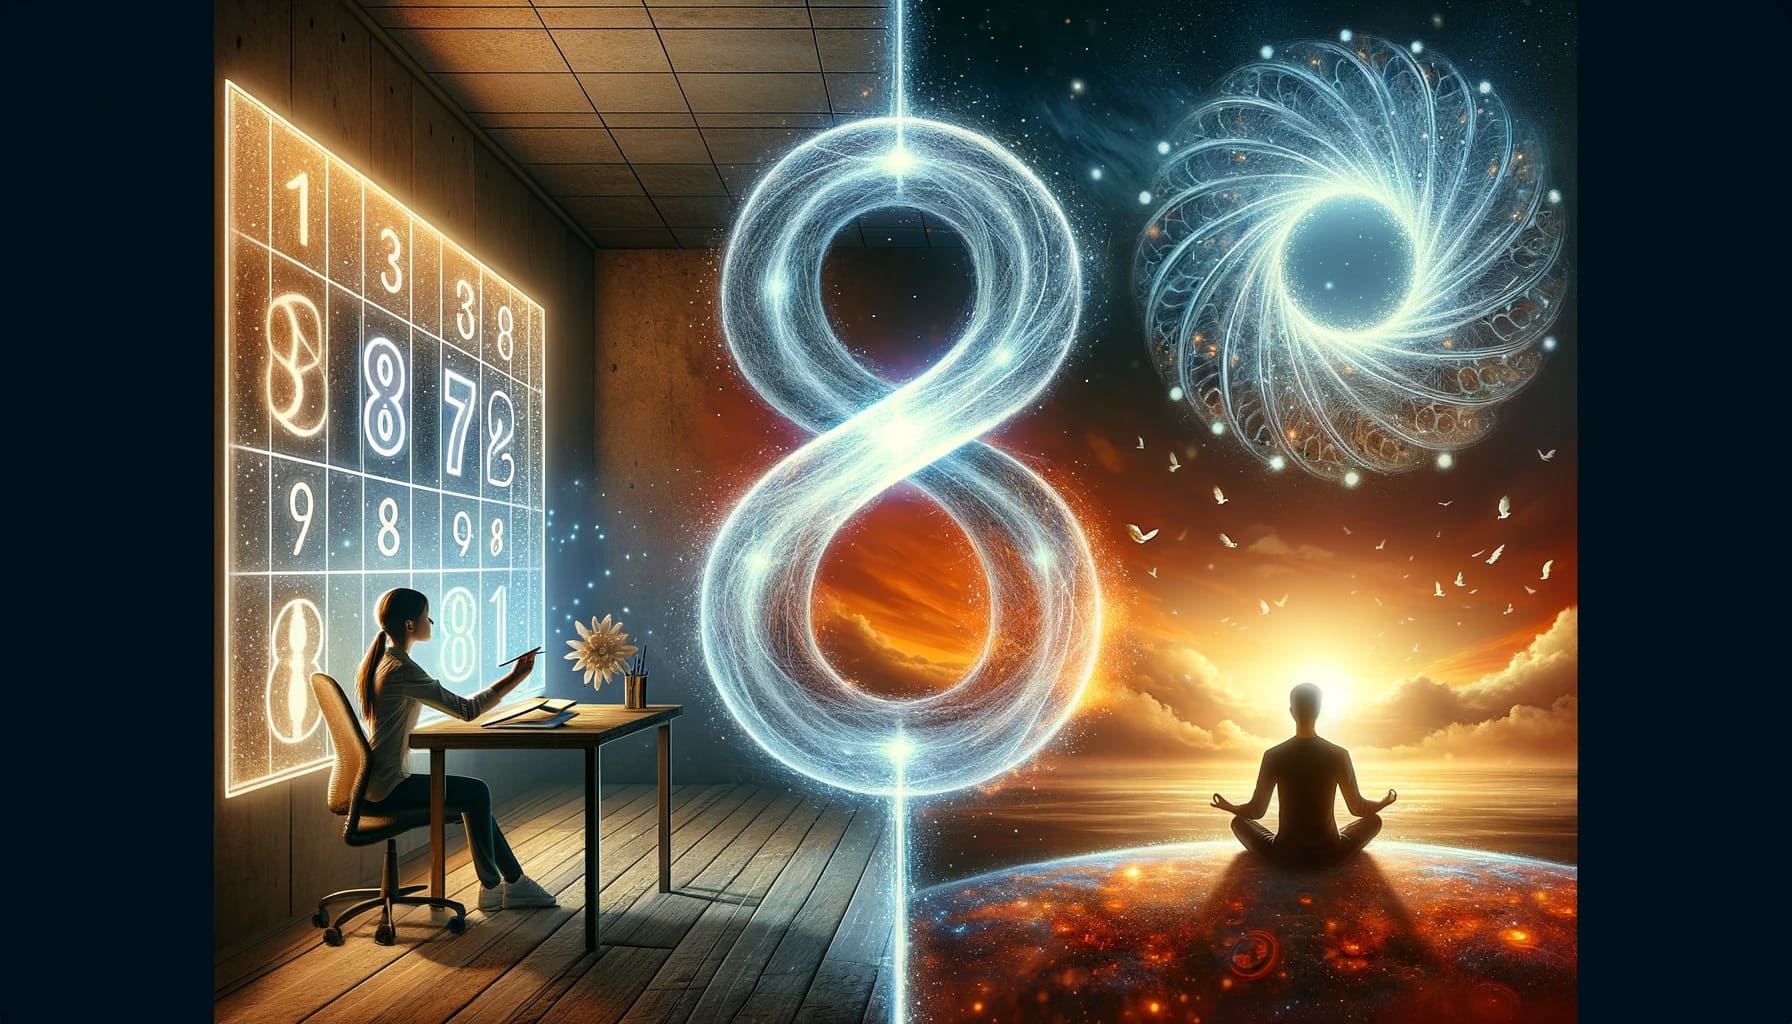 An inspirational image illustrating the integration of the power of the number 8 in life. The scene is divided into two sections reflecting the duali